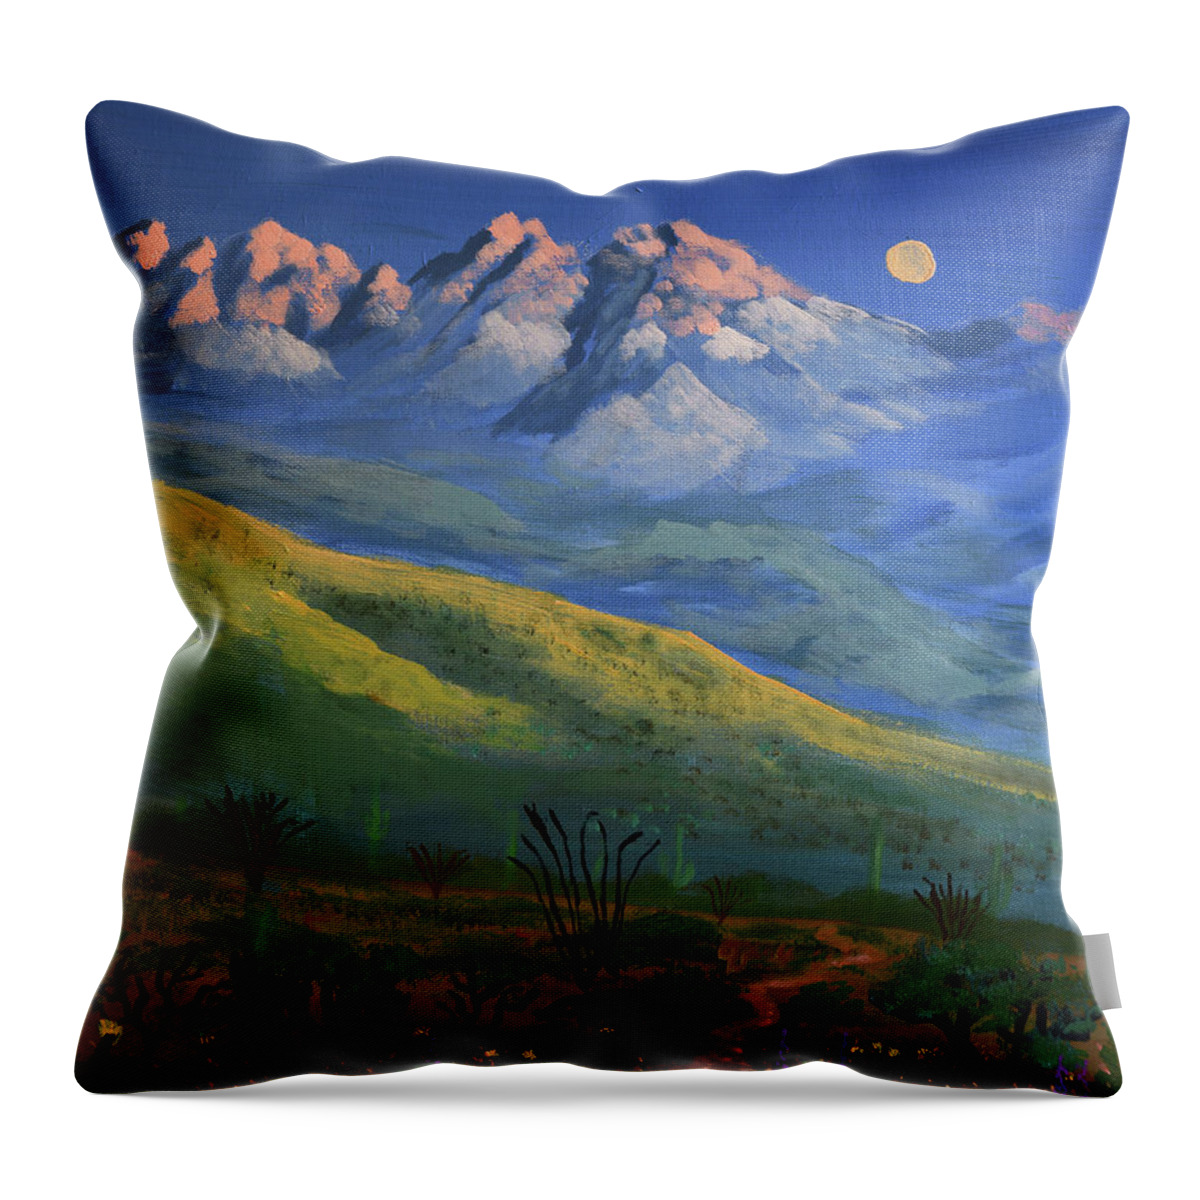 Four Peaks Throw Pillow featuring the painting Four Peaks Snow by Chance Kafka